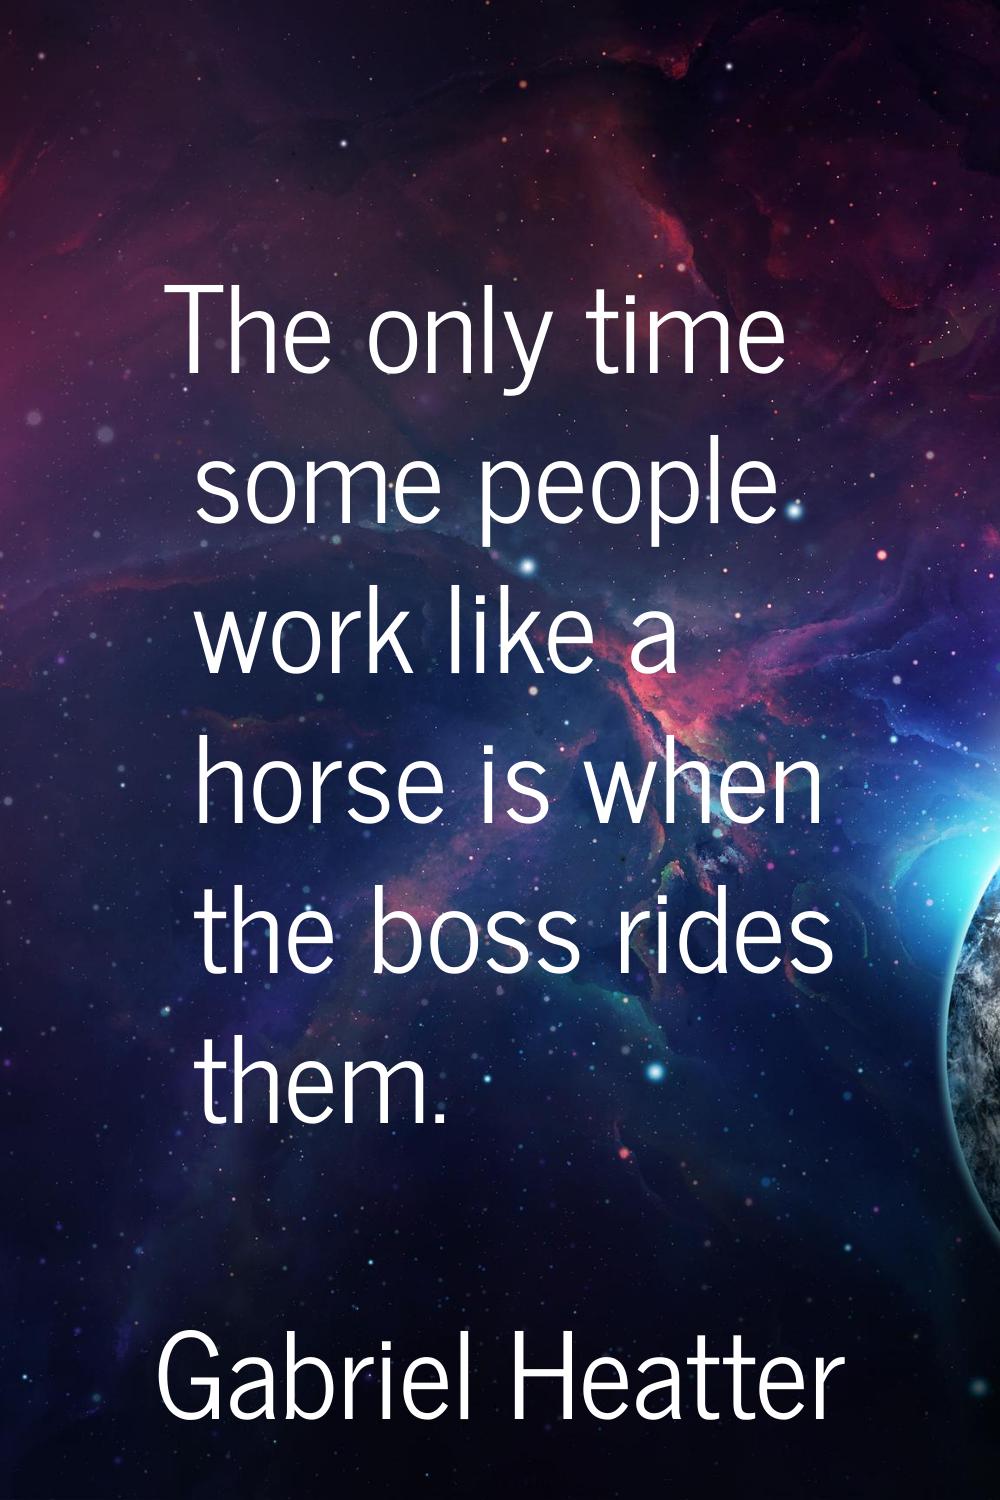 The only time some people work like a horse is when the boss rides them.